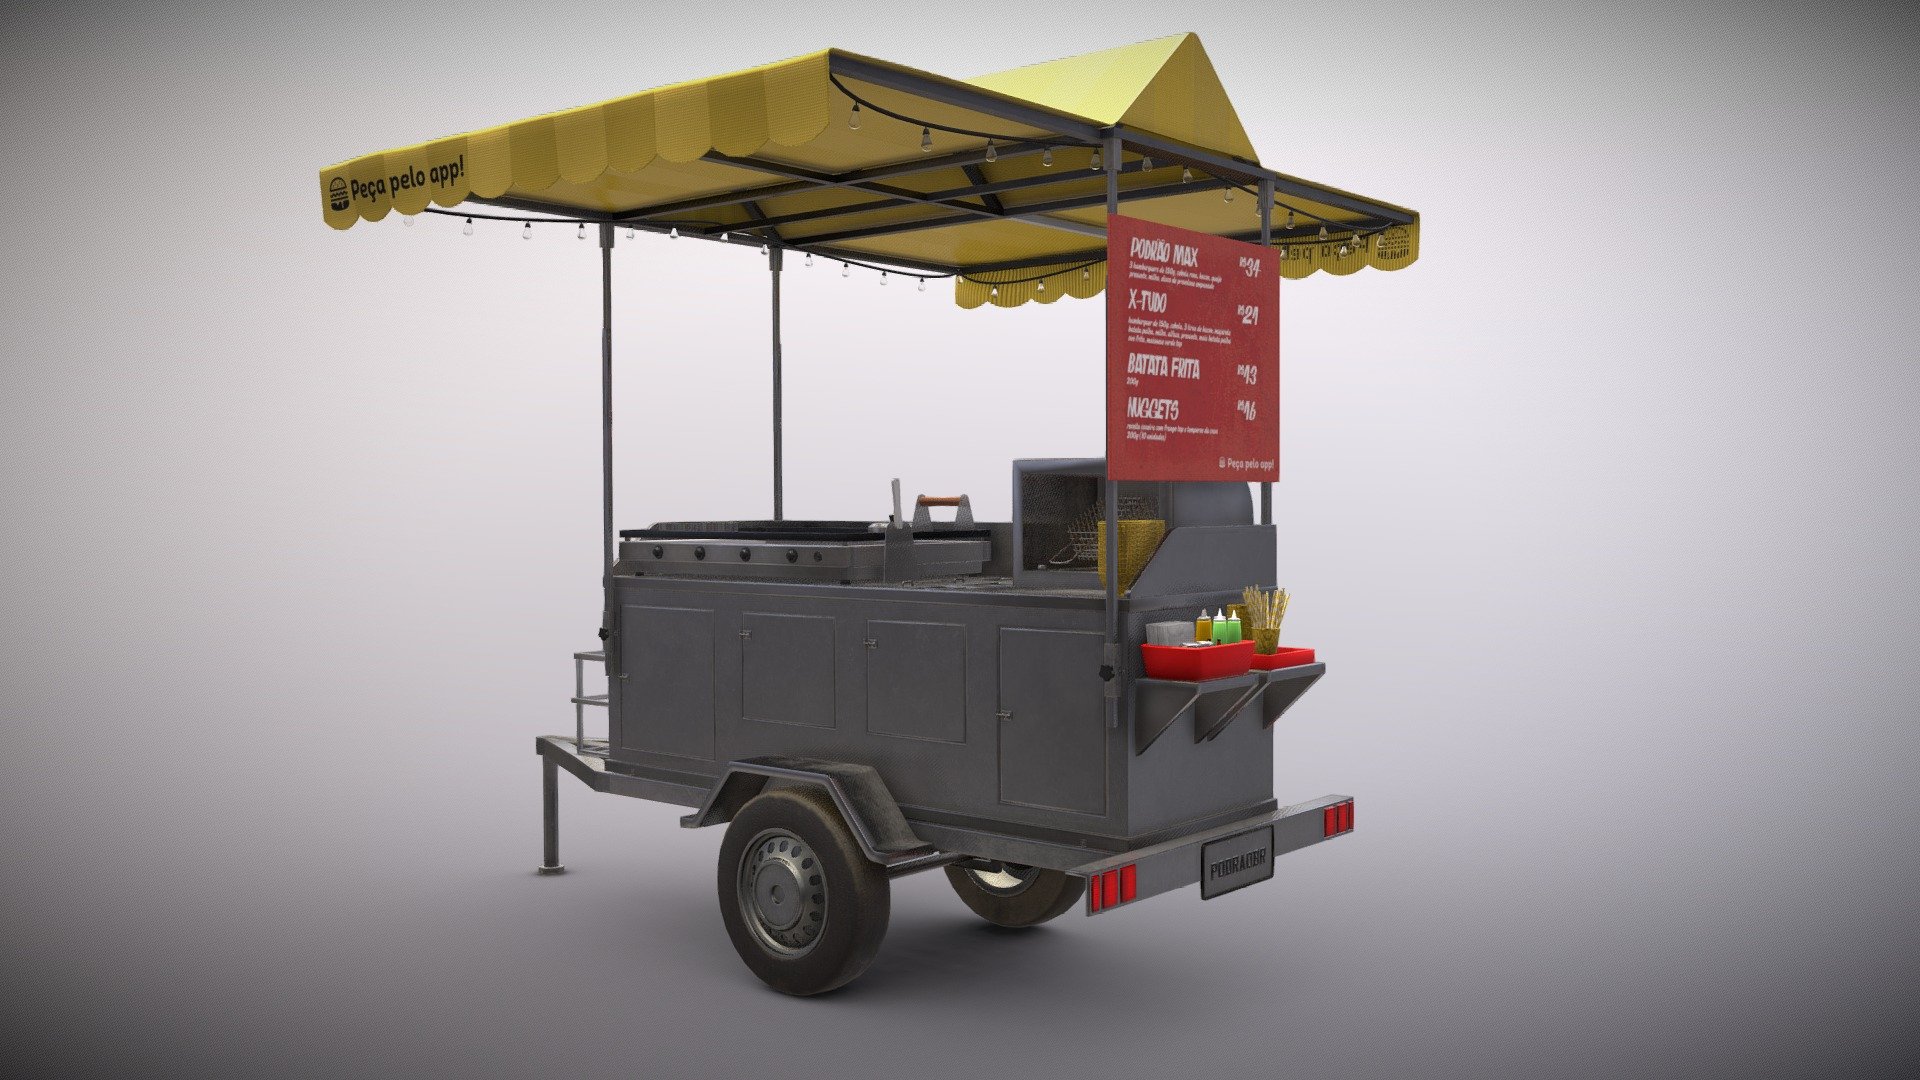 This is part of my Commercial Props for Brazilian street food prop pack, this is a Brazilian suburb style of food truck that selling burgers, we call it as PODRÃO (means something way too rotten, lol&hellip; due to be the true nature o trash food), and this is cheap, subpar compared to burger stores, but unique delicious and used to have a bunch of ingredients.

The complete pack have: 

26 props 

7 blueprint 

5 customizable props 

74 material instances 

Textures from 2k to 4k

Min Blender 3.3.0+ and Unreal 5.1.1+

You can find more information on my ArtStation page: http://www.artstation.com/frazao - Commercial Prop for Brazilian street food - 3/8 - Buy Royalty Free 3D model by Marcos Frazão (@frazao99) 3d model